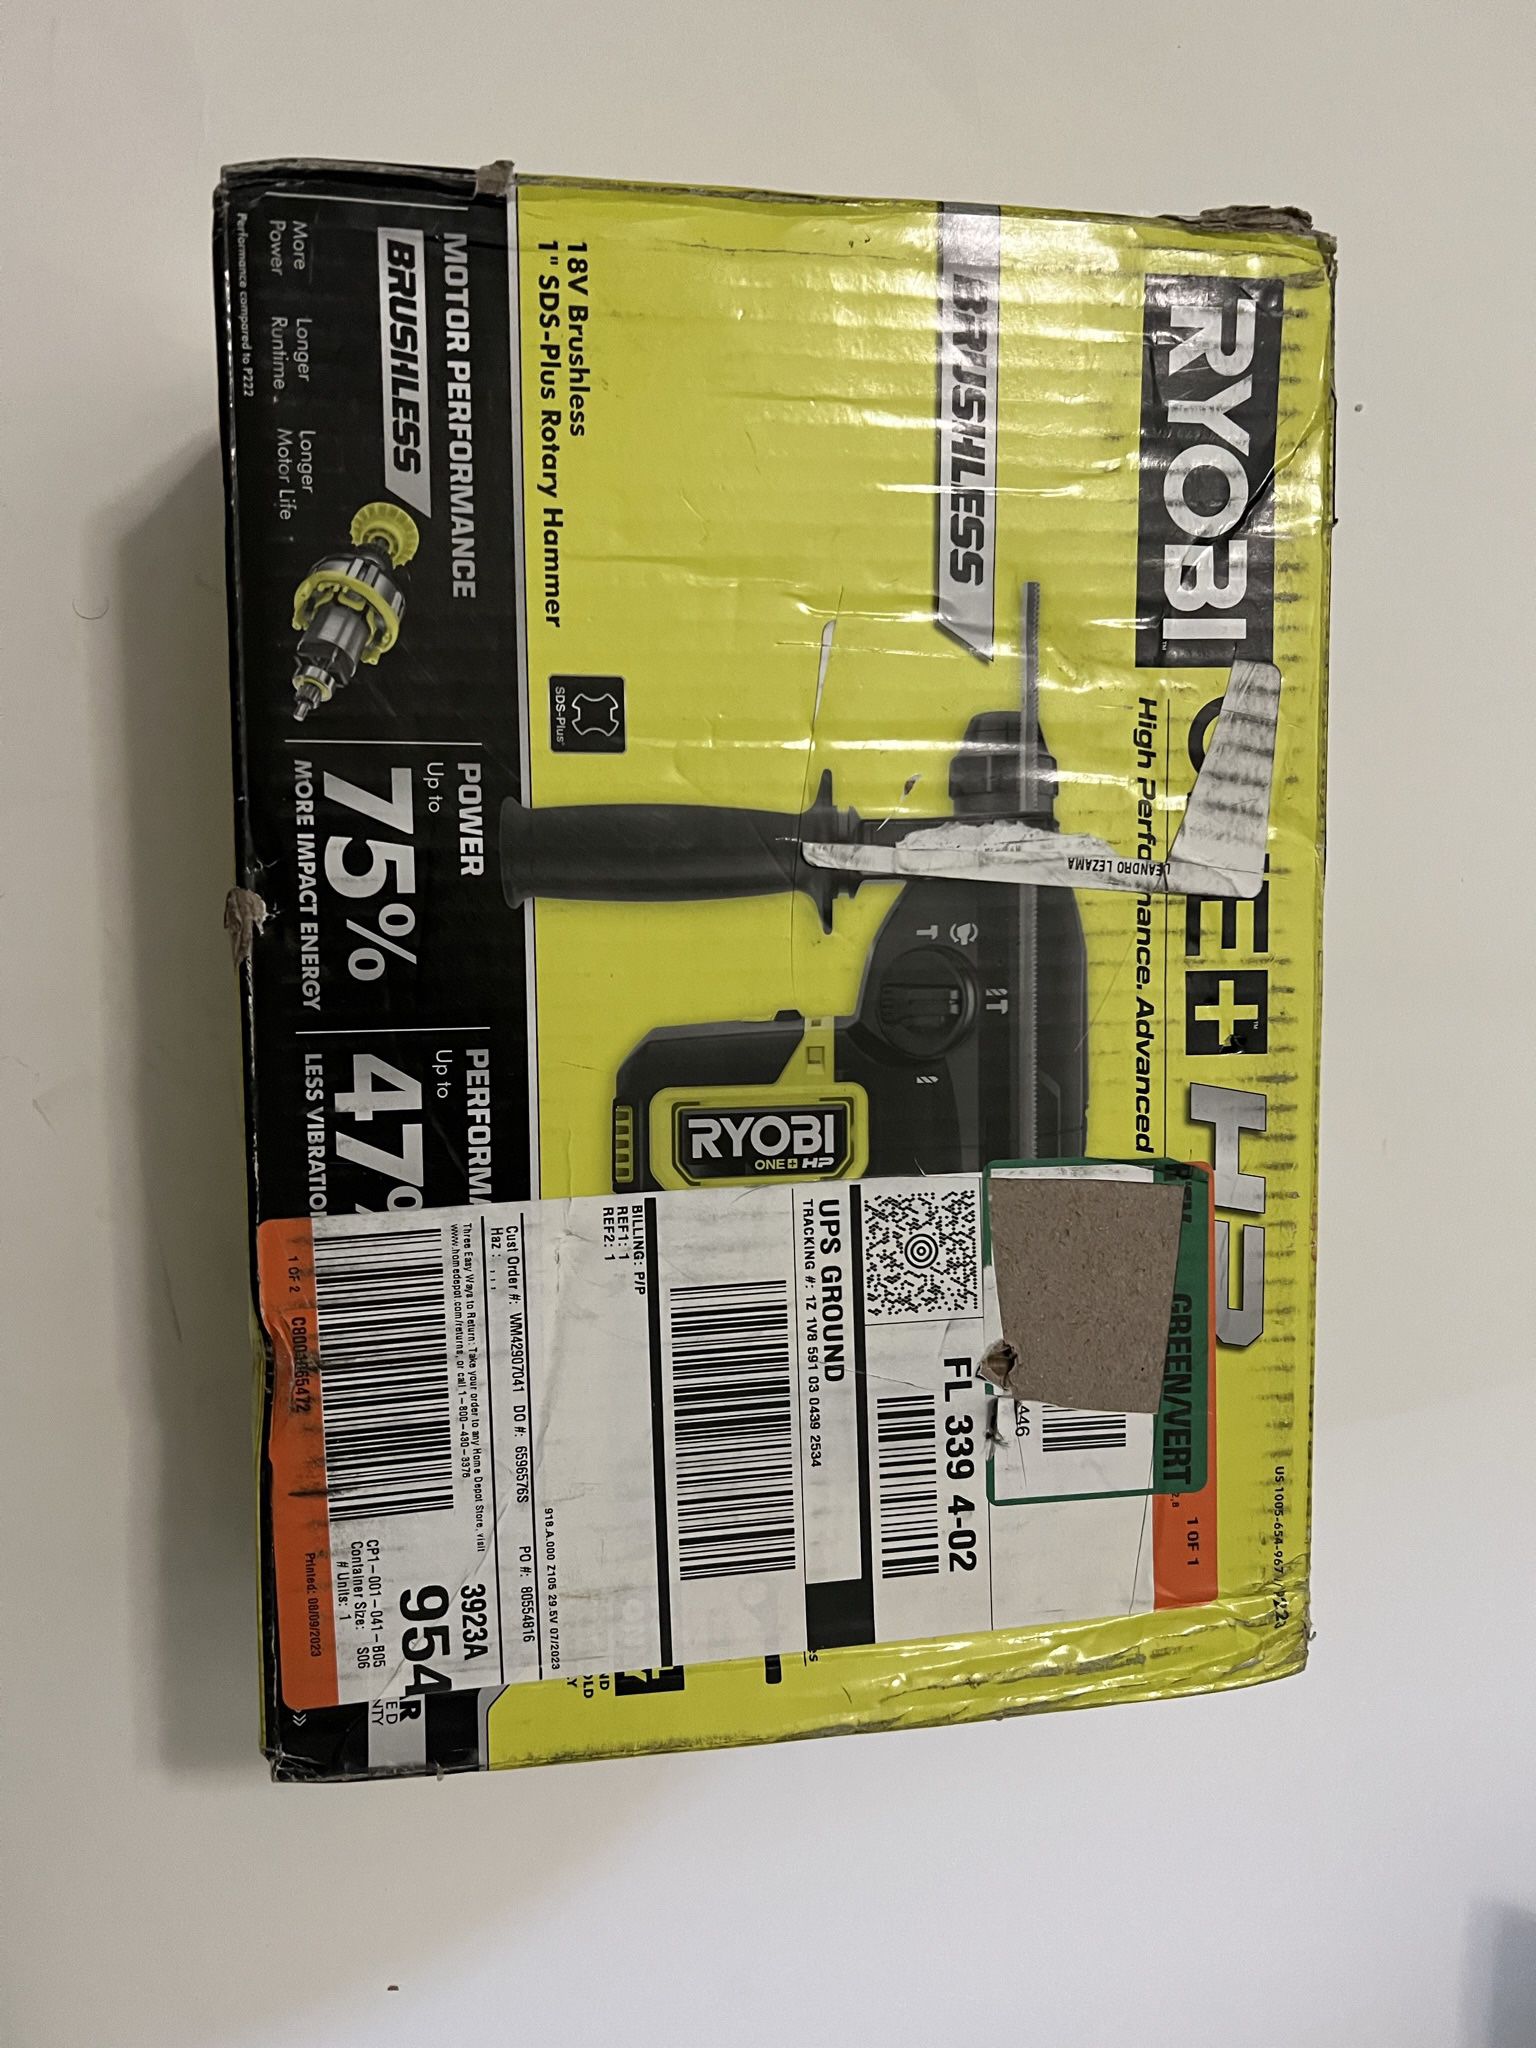 Ryobi ONE+ HP 18V Brushless Cordless 1 in. SDS-Plus Rotary Hammer Drill (Tool Only)